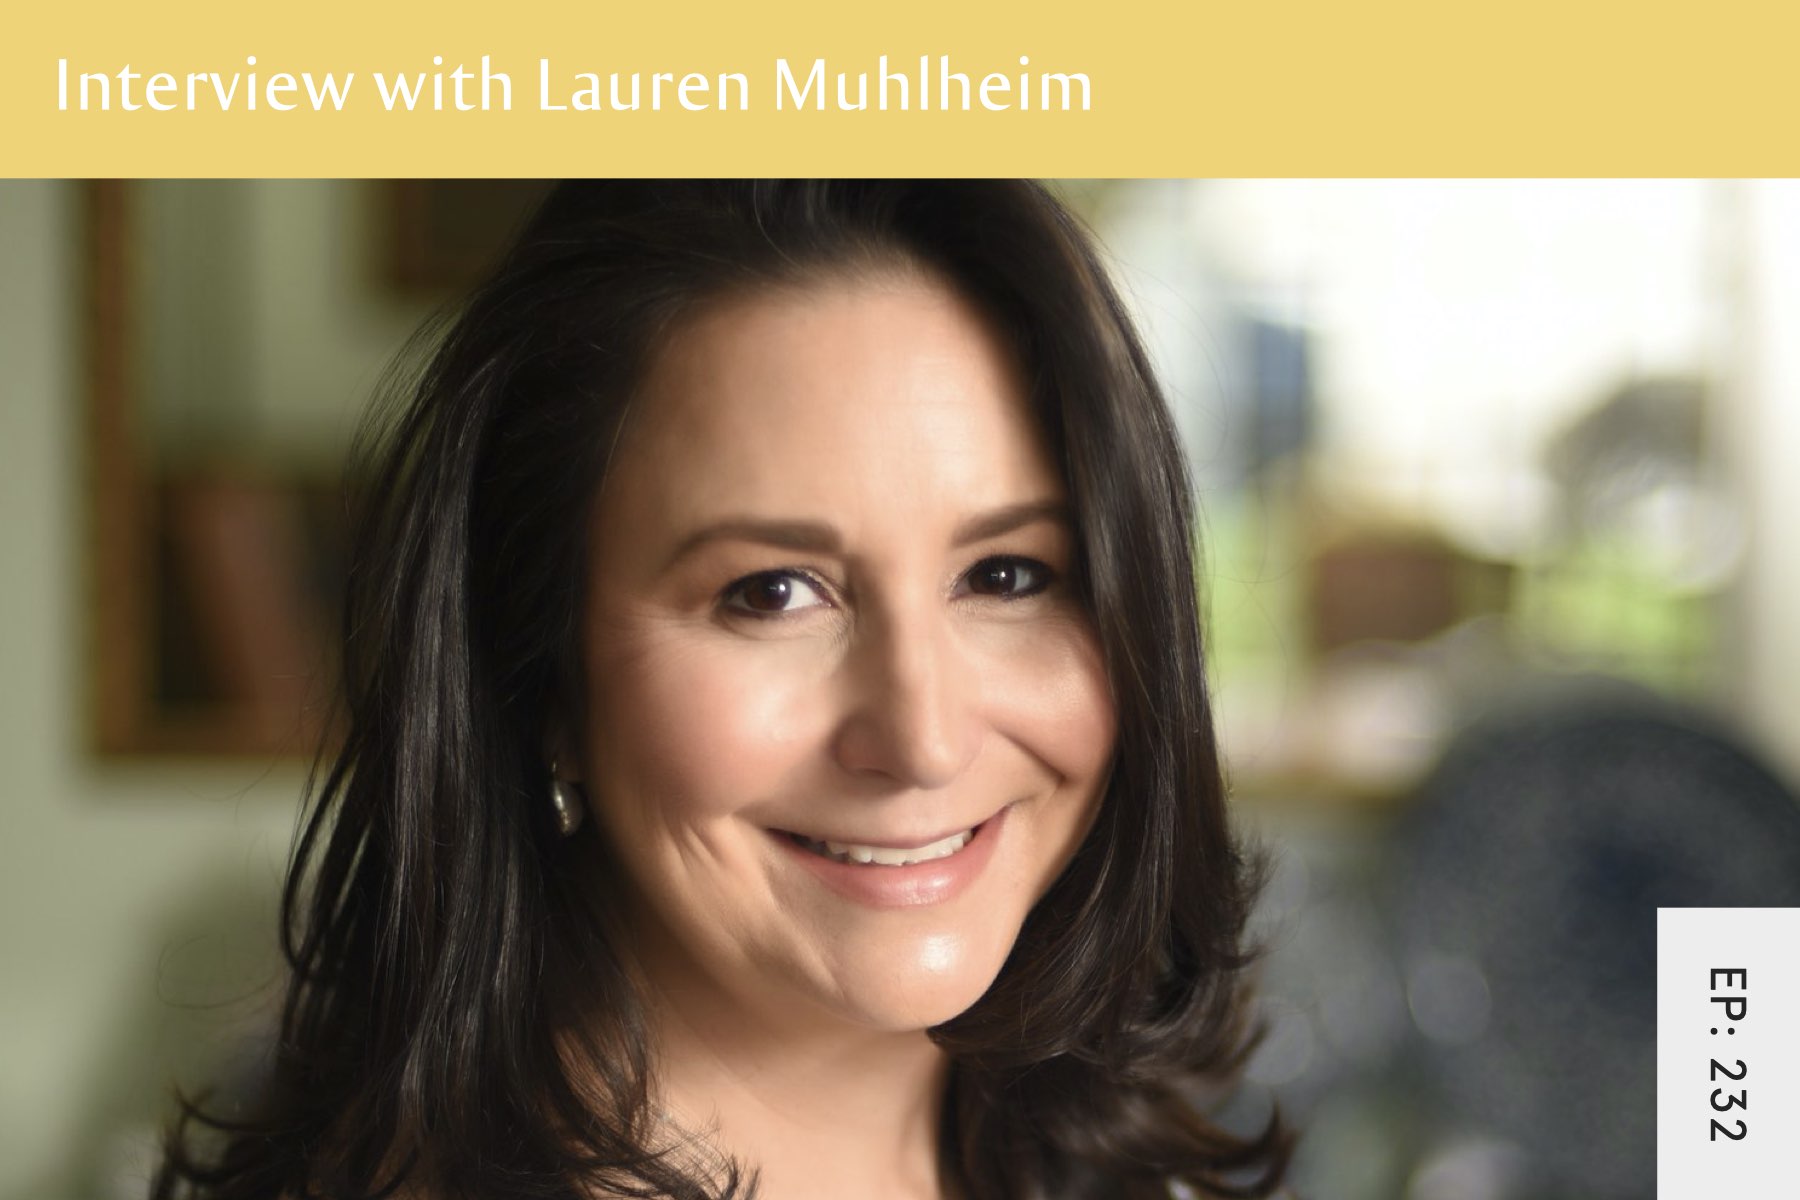 232: Cognitive Behavioural Therapy (CBT) for Eating Disorders and Avoidant Restrictive Food Intake Disorder (ARFID) with Dr. Lauren Muhlheim - Seven Health: Eating Disorder Recovery and Anti Diet Nutritionist